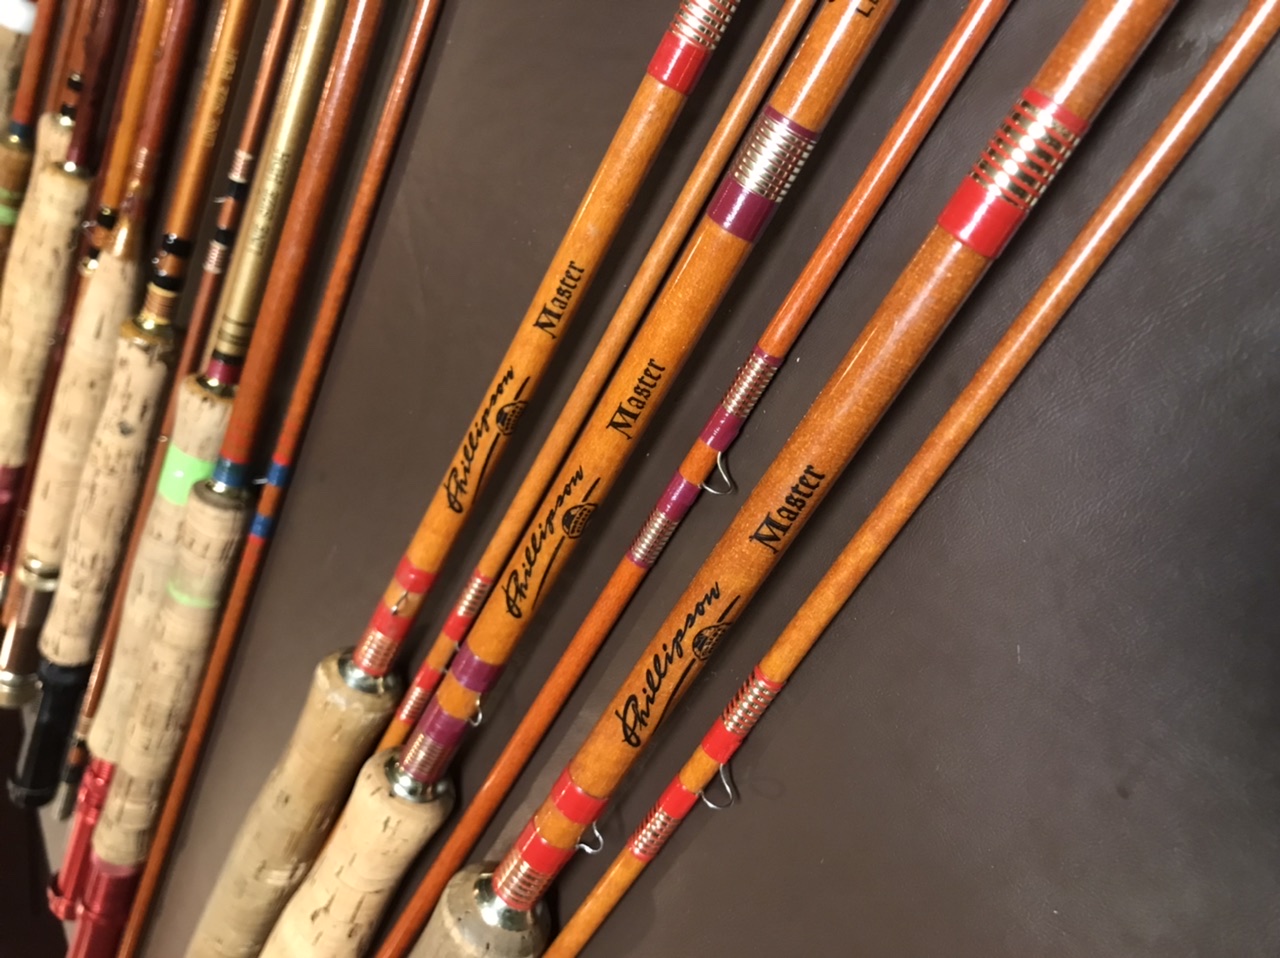 Phillipson Eponite P76, Collecting Fiberglass Fly Rods